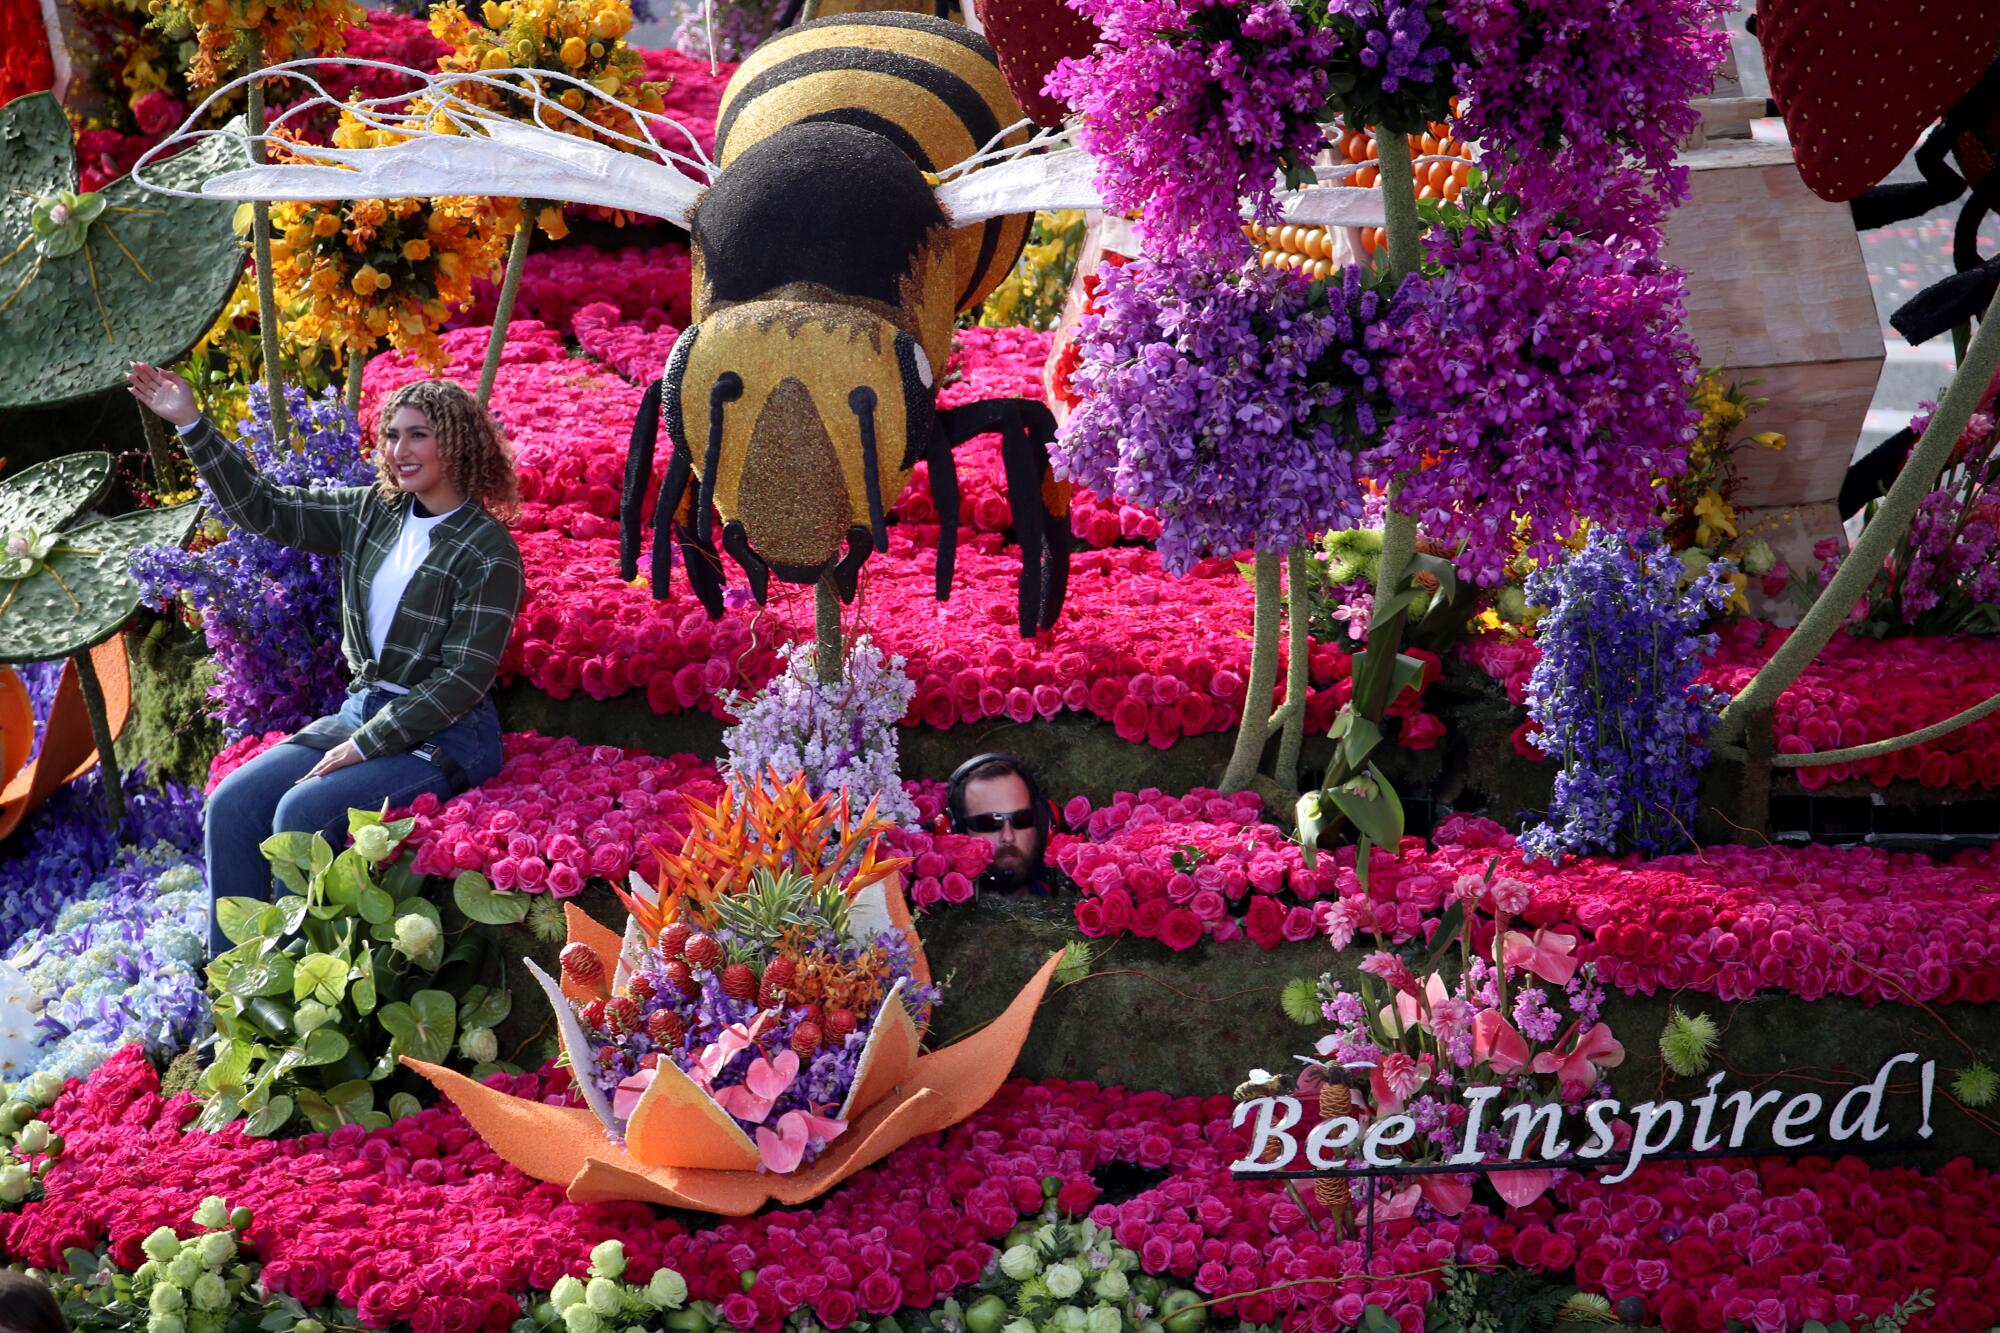 A Rose Parade float features bees and the text "Bee Inspired!"